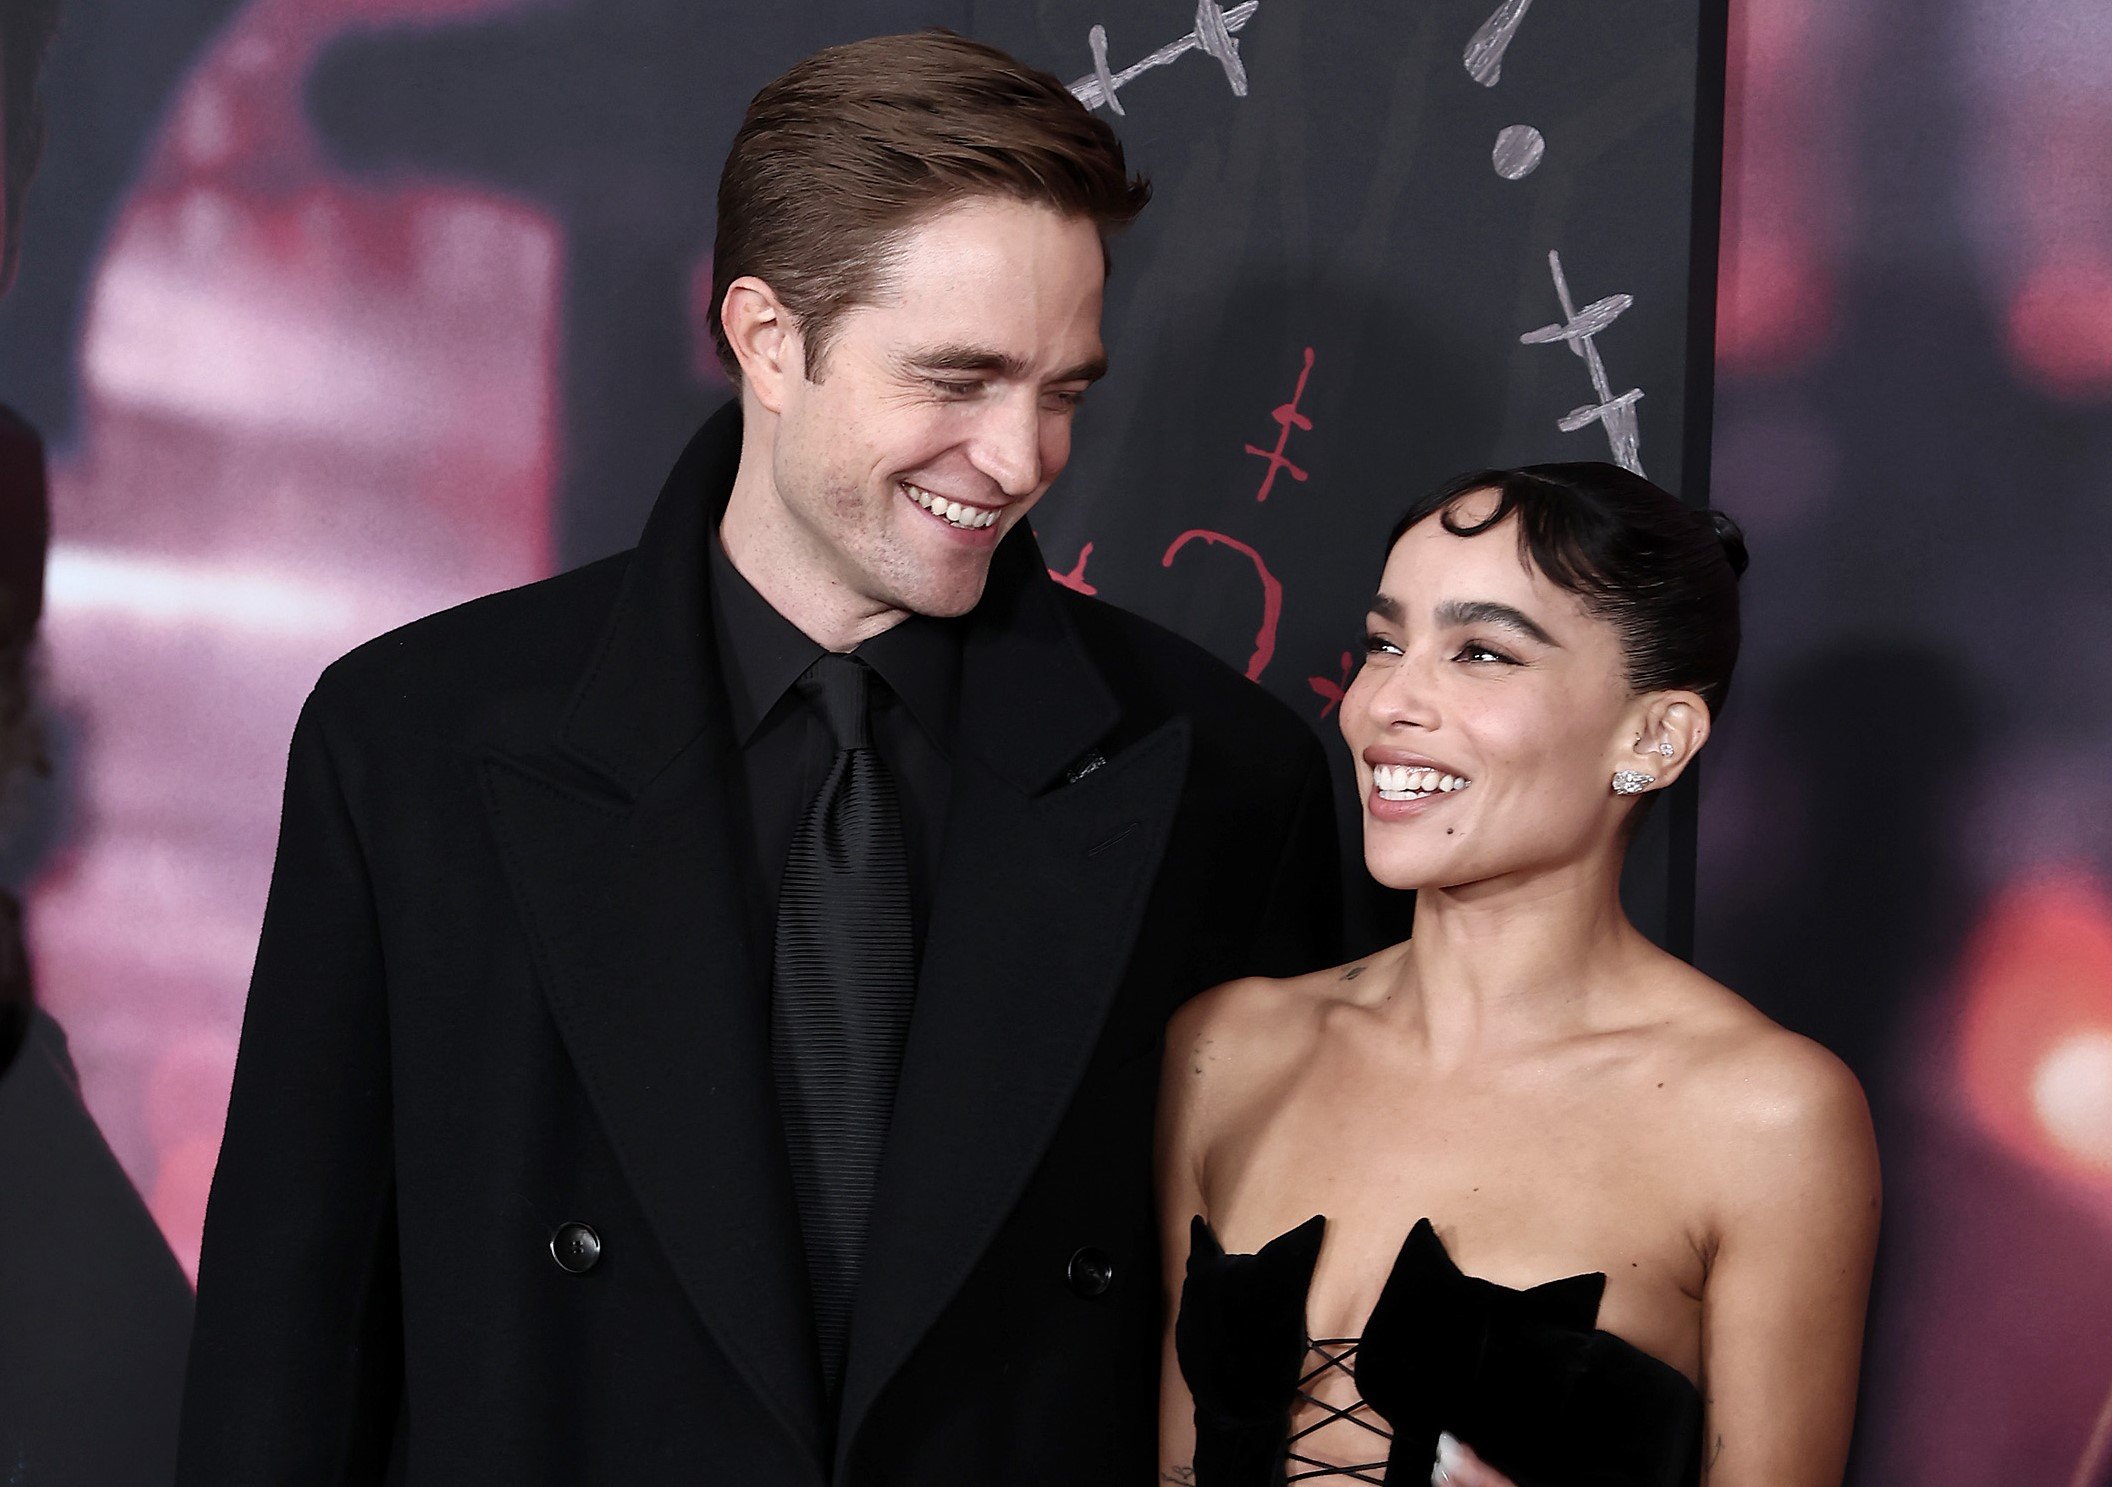 'The Batman' stars Robert Pattinson and Zoë Kravitz pose for photos together on the red carpet of the premiere. Pattinson wears a black coat over a black button-up shirt and black tie. Kravitz wears a strapless black dress with a neckline shaped like two cats.